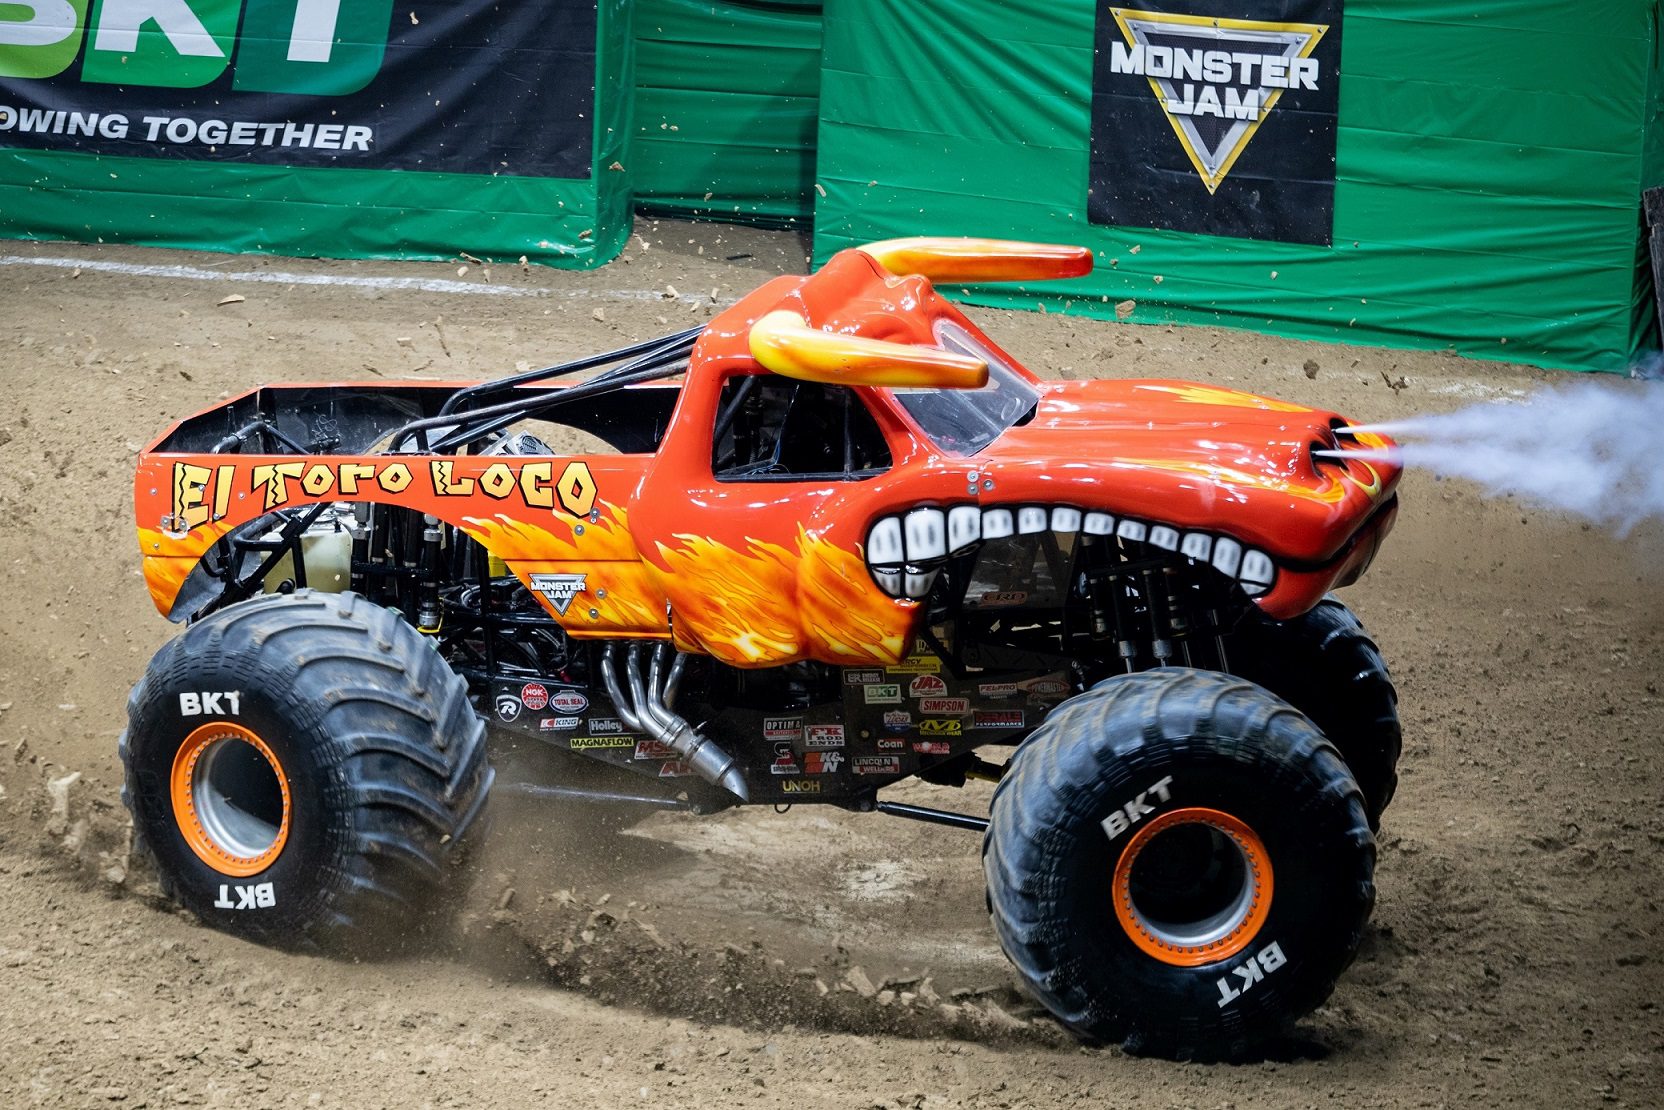 This year marked a historic moment when Monster Jam made its triumphant return to Abu Dhabi after nearly a decade 1